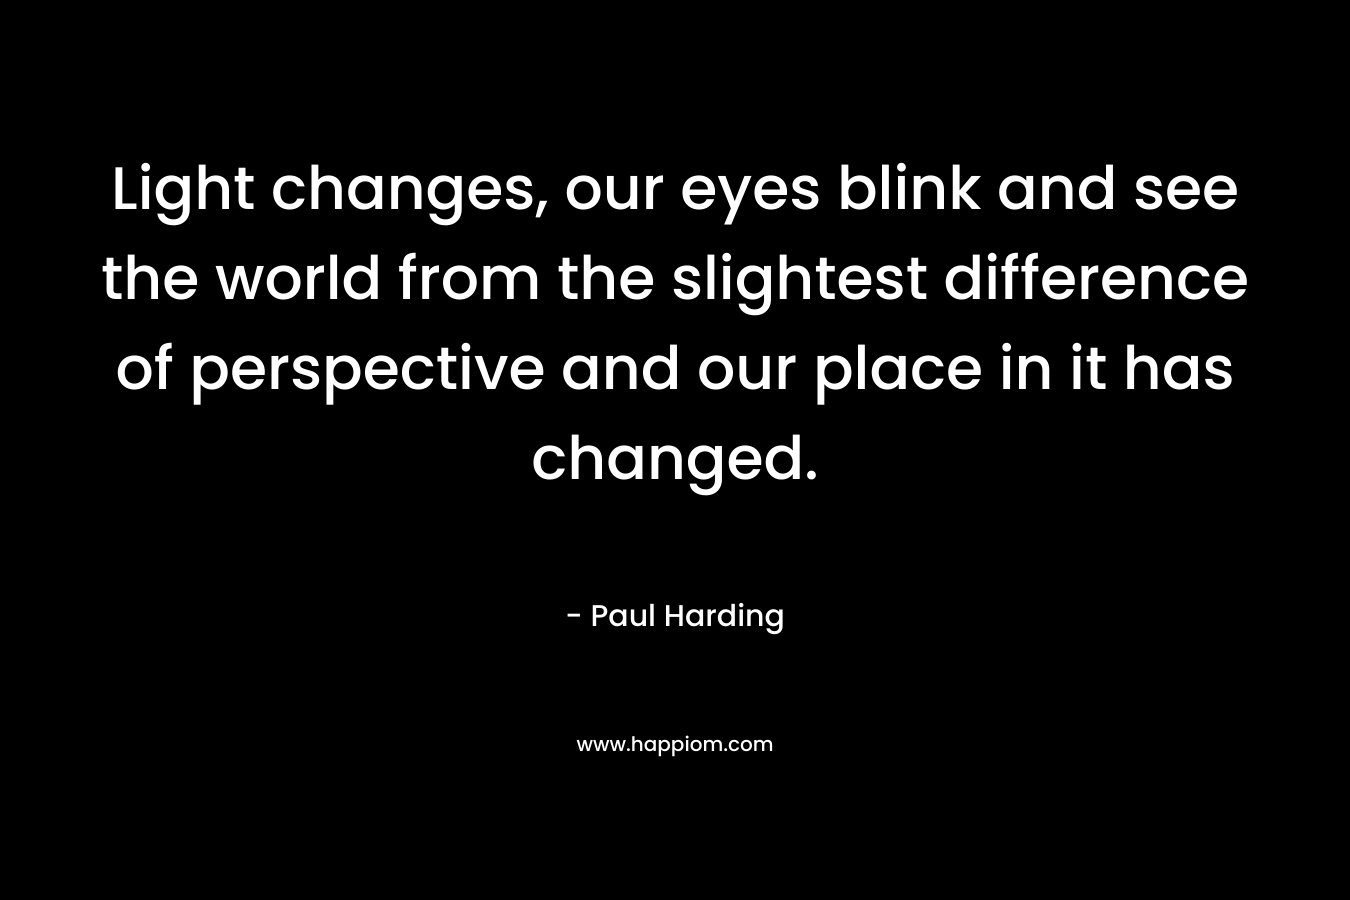 Light changes, our eyes blink and see the world from the slightest difference of perspective and our place in it has changed.